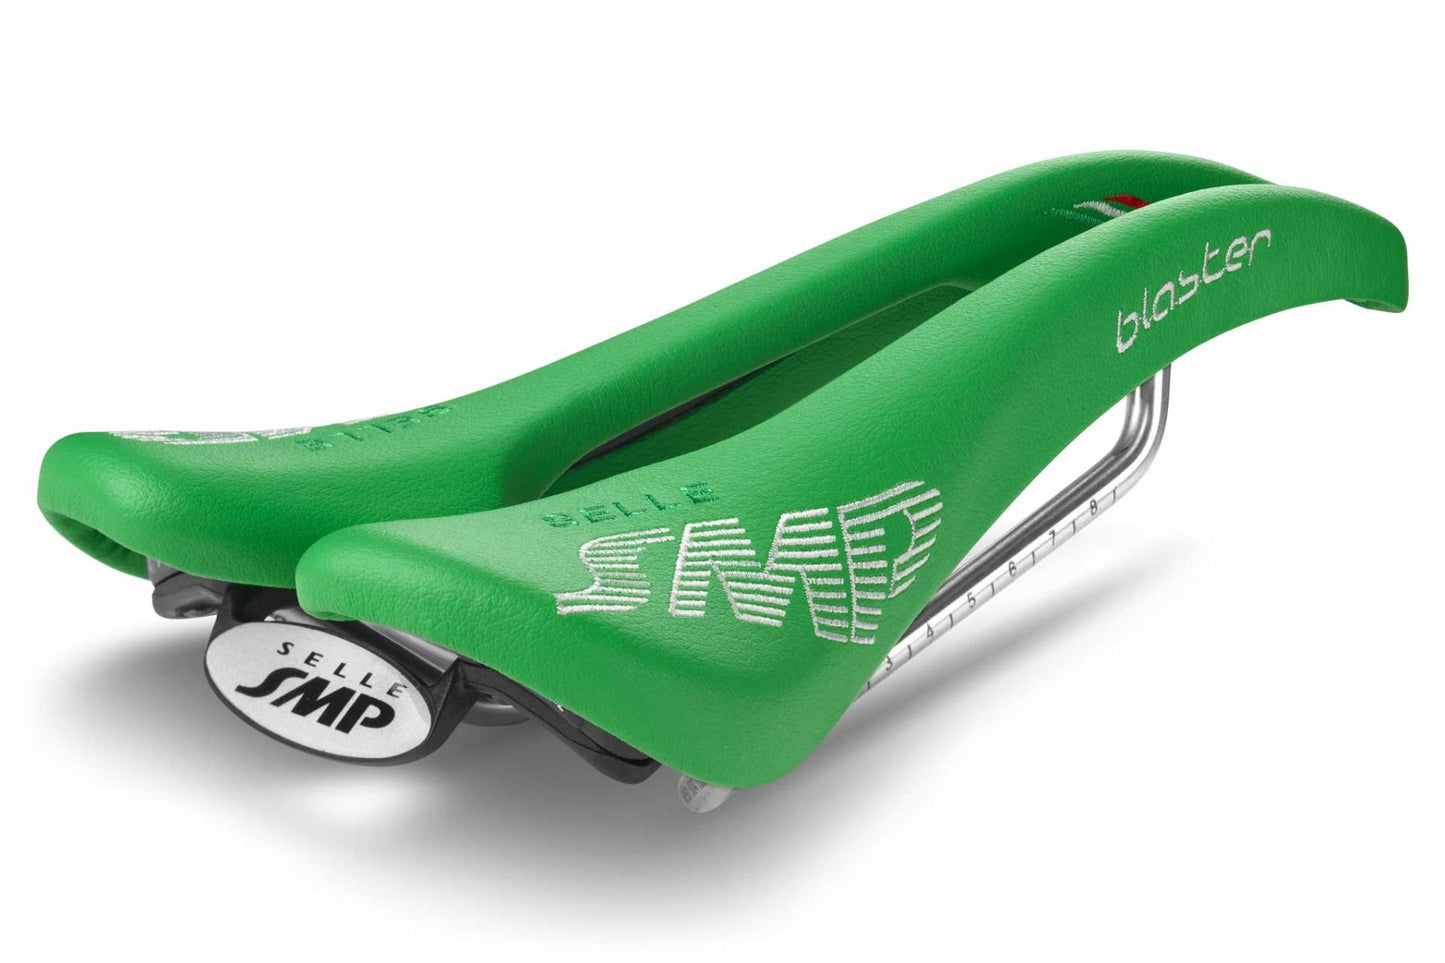 Selle SMP Blaster Saddle with Steel Rails (Green)